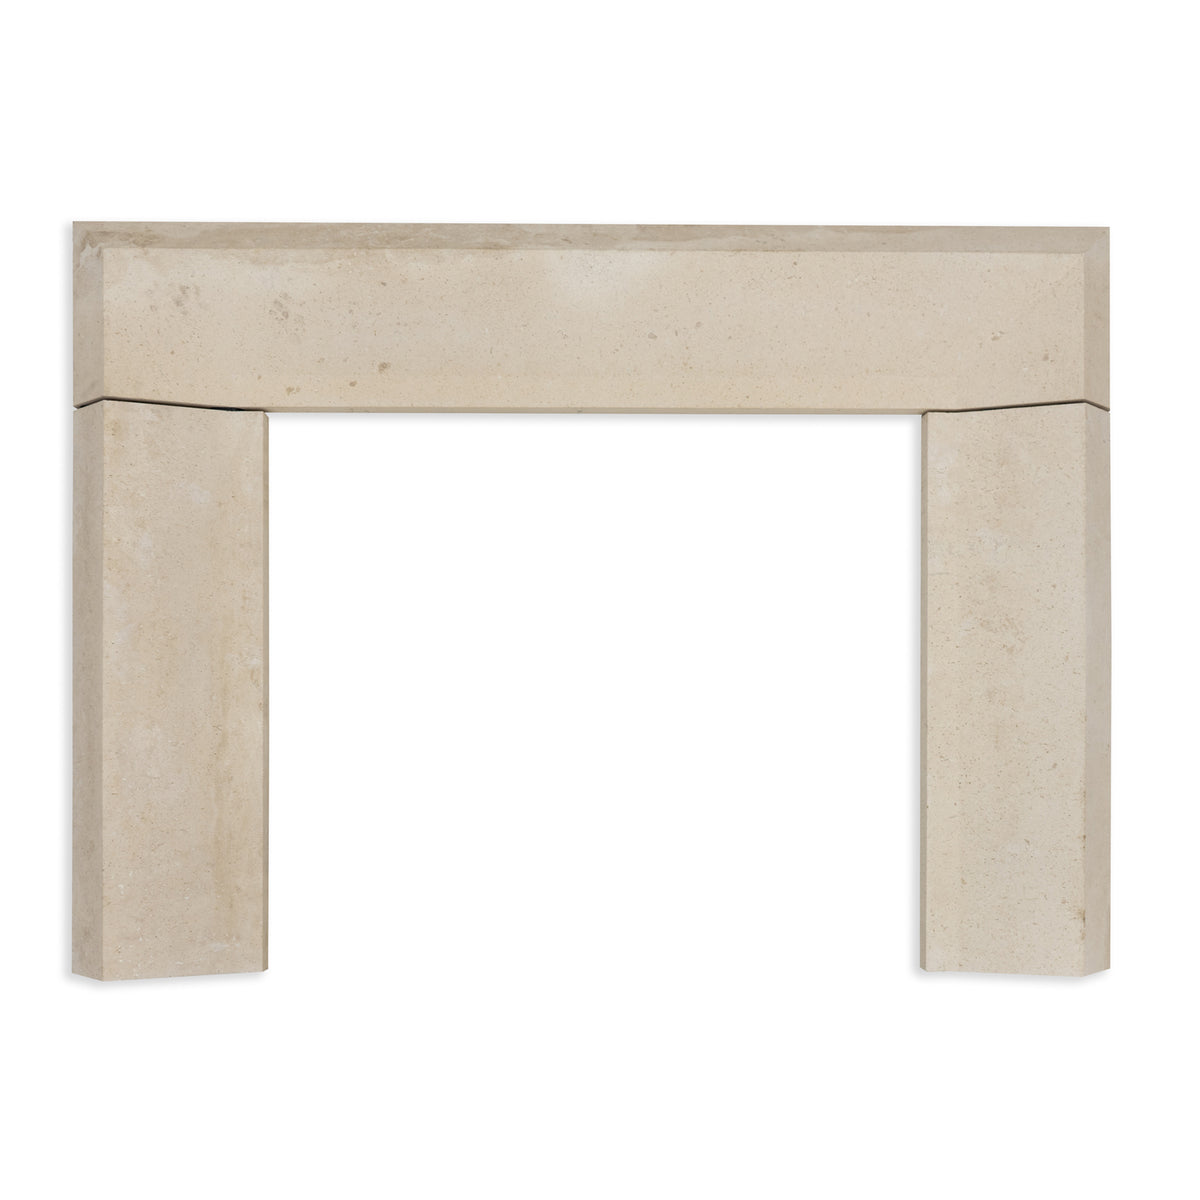 Meridian Fireplace in Seville Travertine with Honed Finish view 3